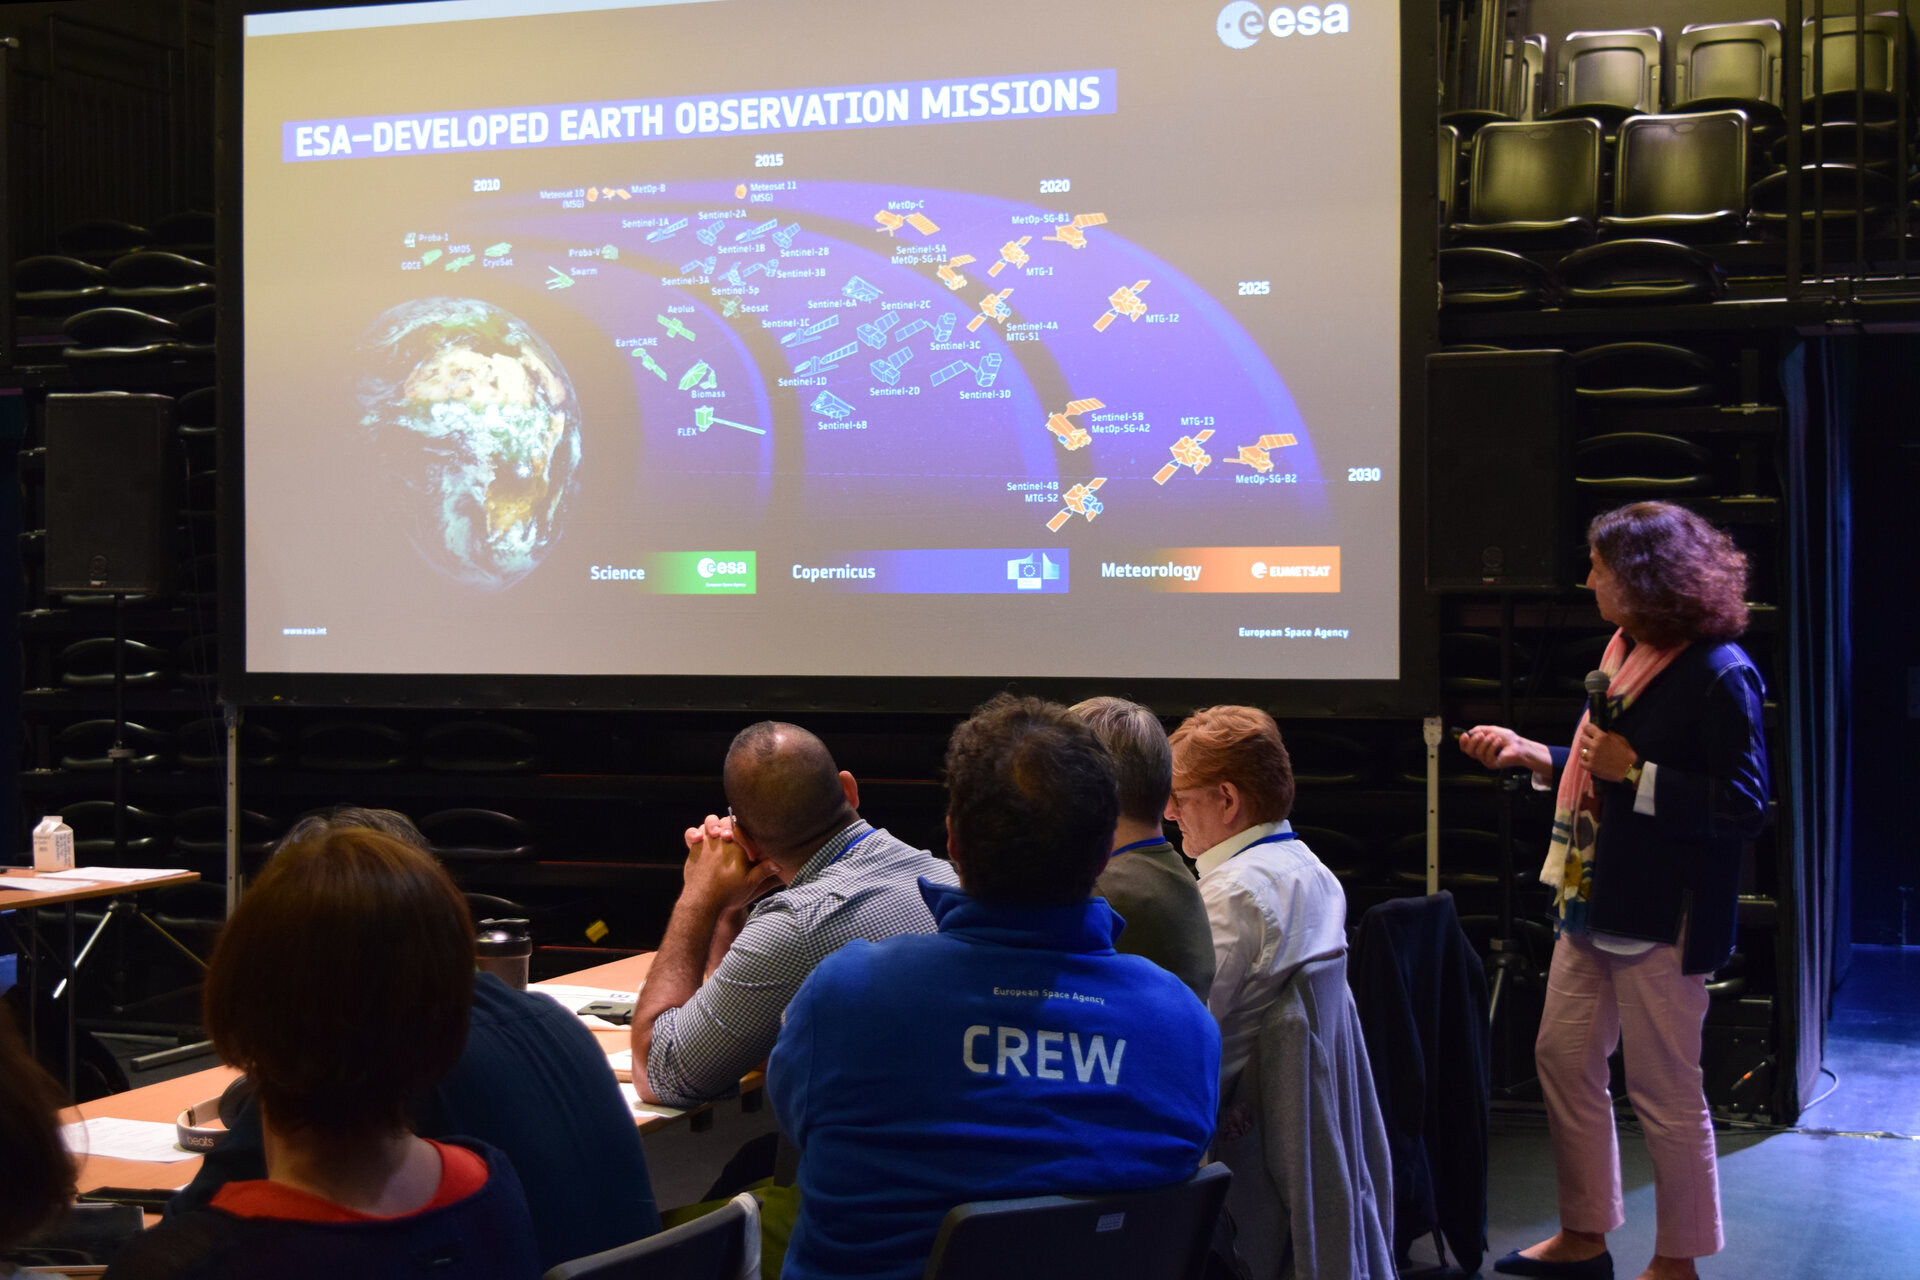 Maria Menendez, presents overview of ESA’s developed Earth observation missions